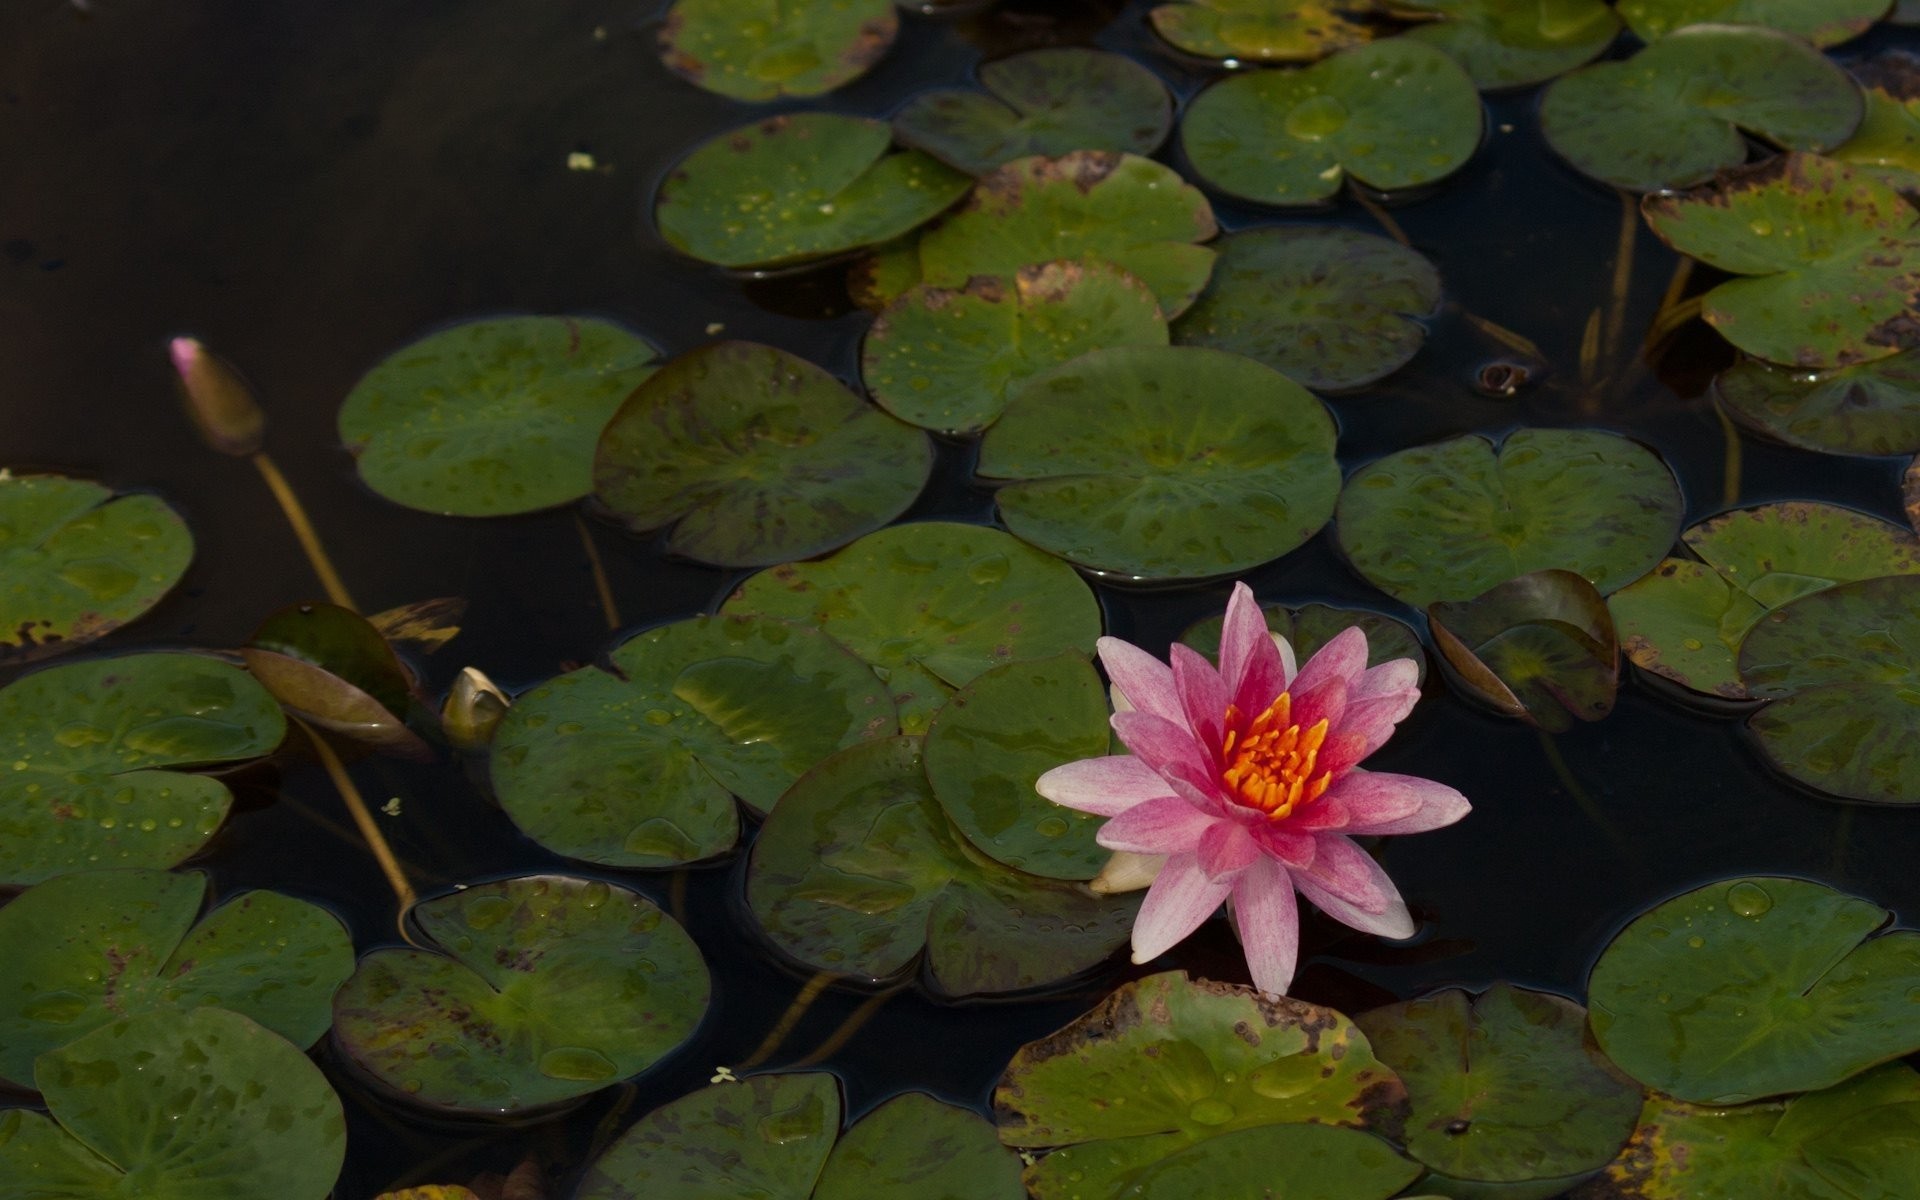 Res - 2560x1600, - Sacred Lotus , HD Wallpaper & Backgrounds